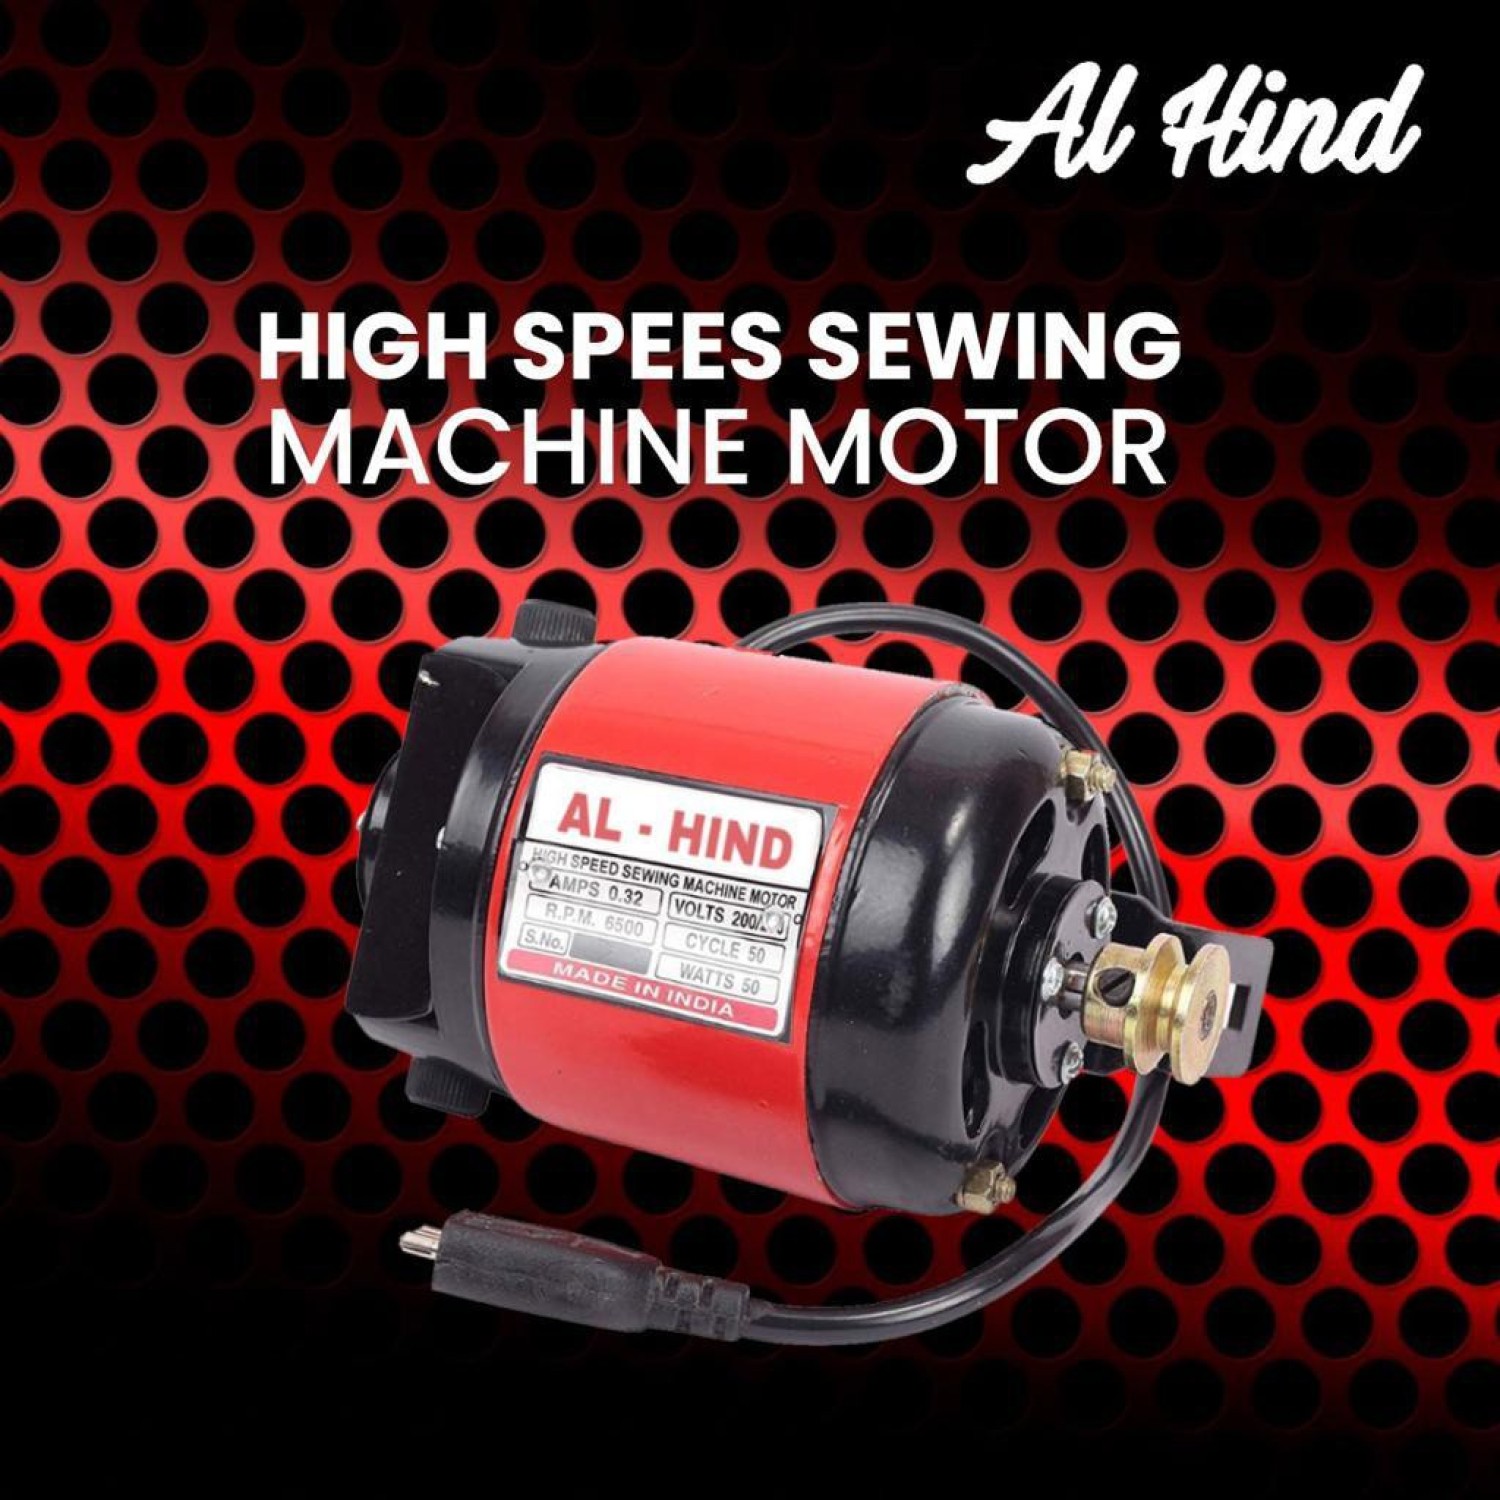 Al hind Sewing Machine Motor (Copper Winding) Electric Sewing